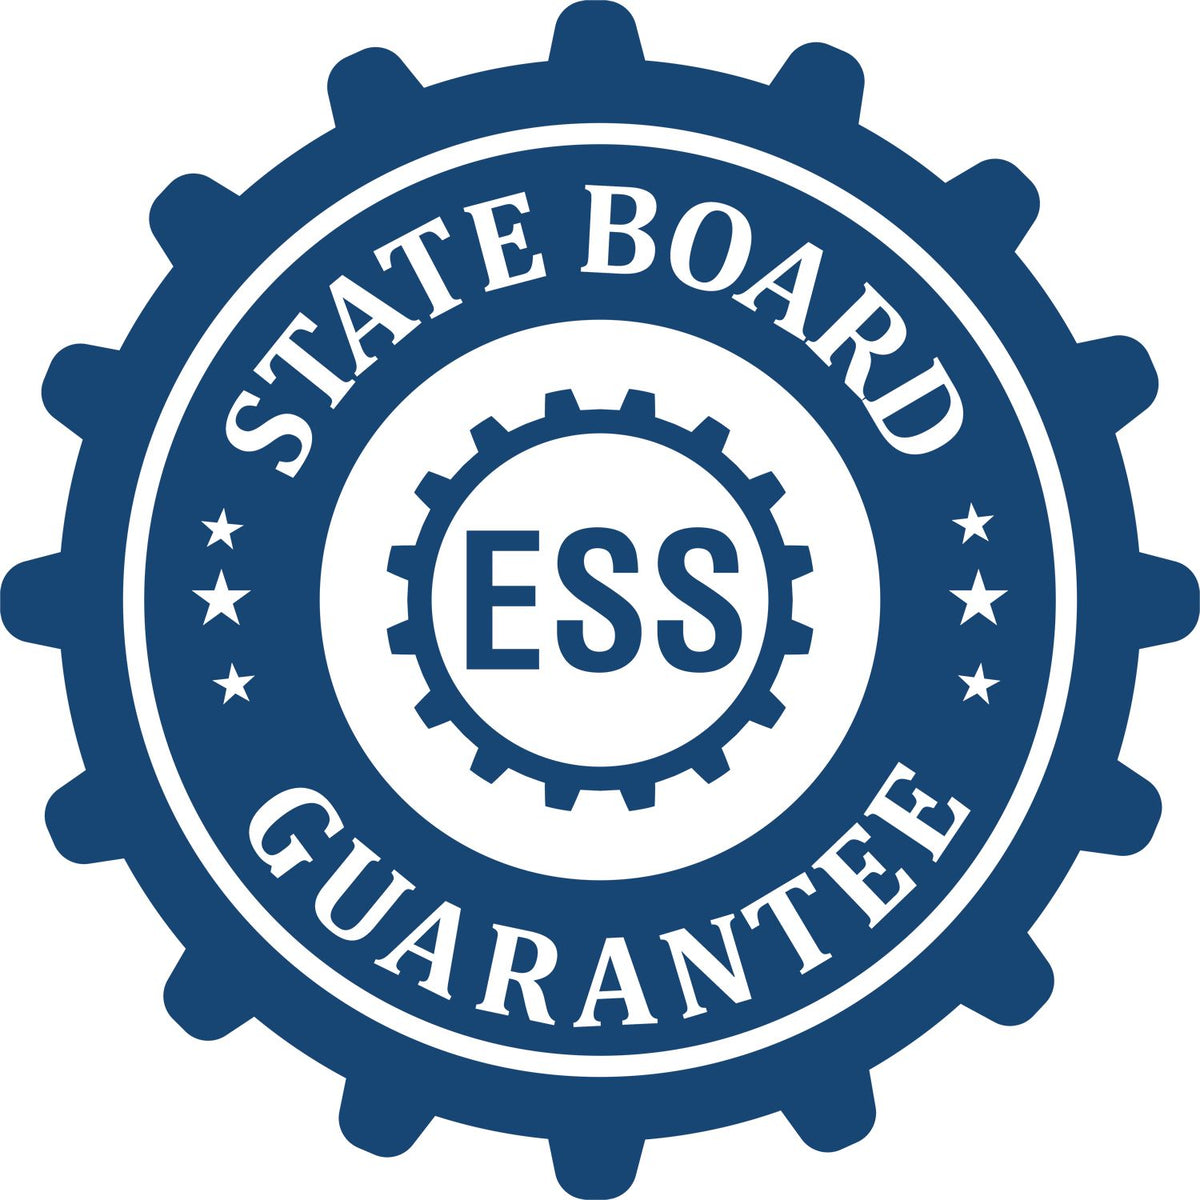 An emblem in a gear shape illustrating a state board guarantee for the Digital South Carolina Geologist Stamp, Electronic Seal for South Carolina Geologist